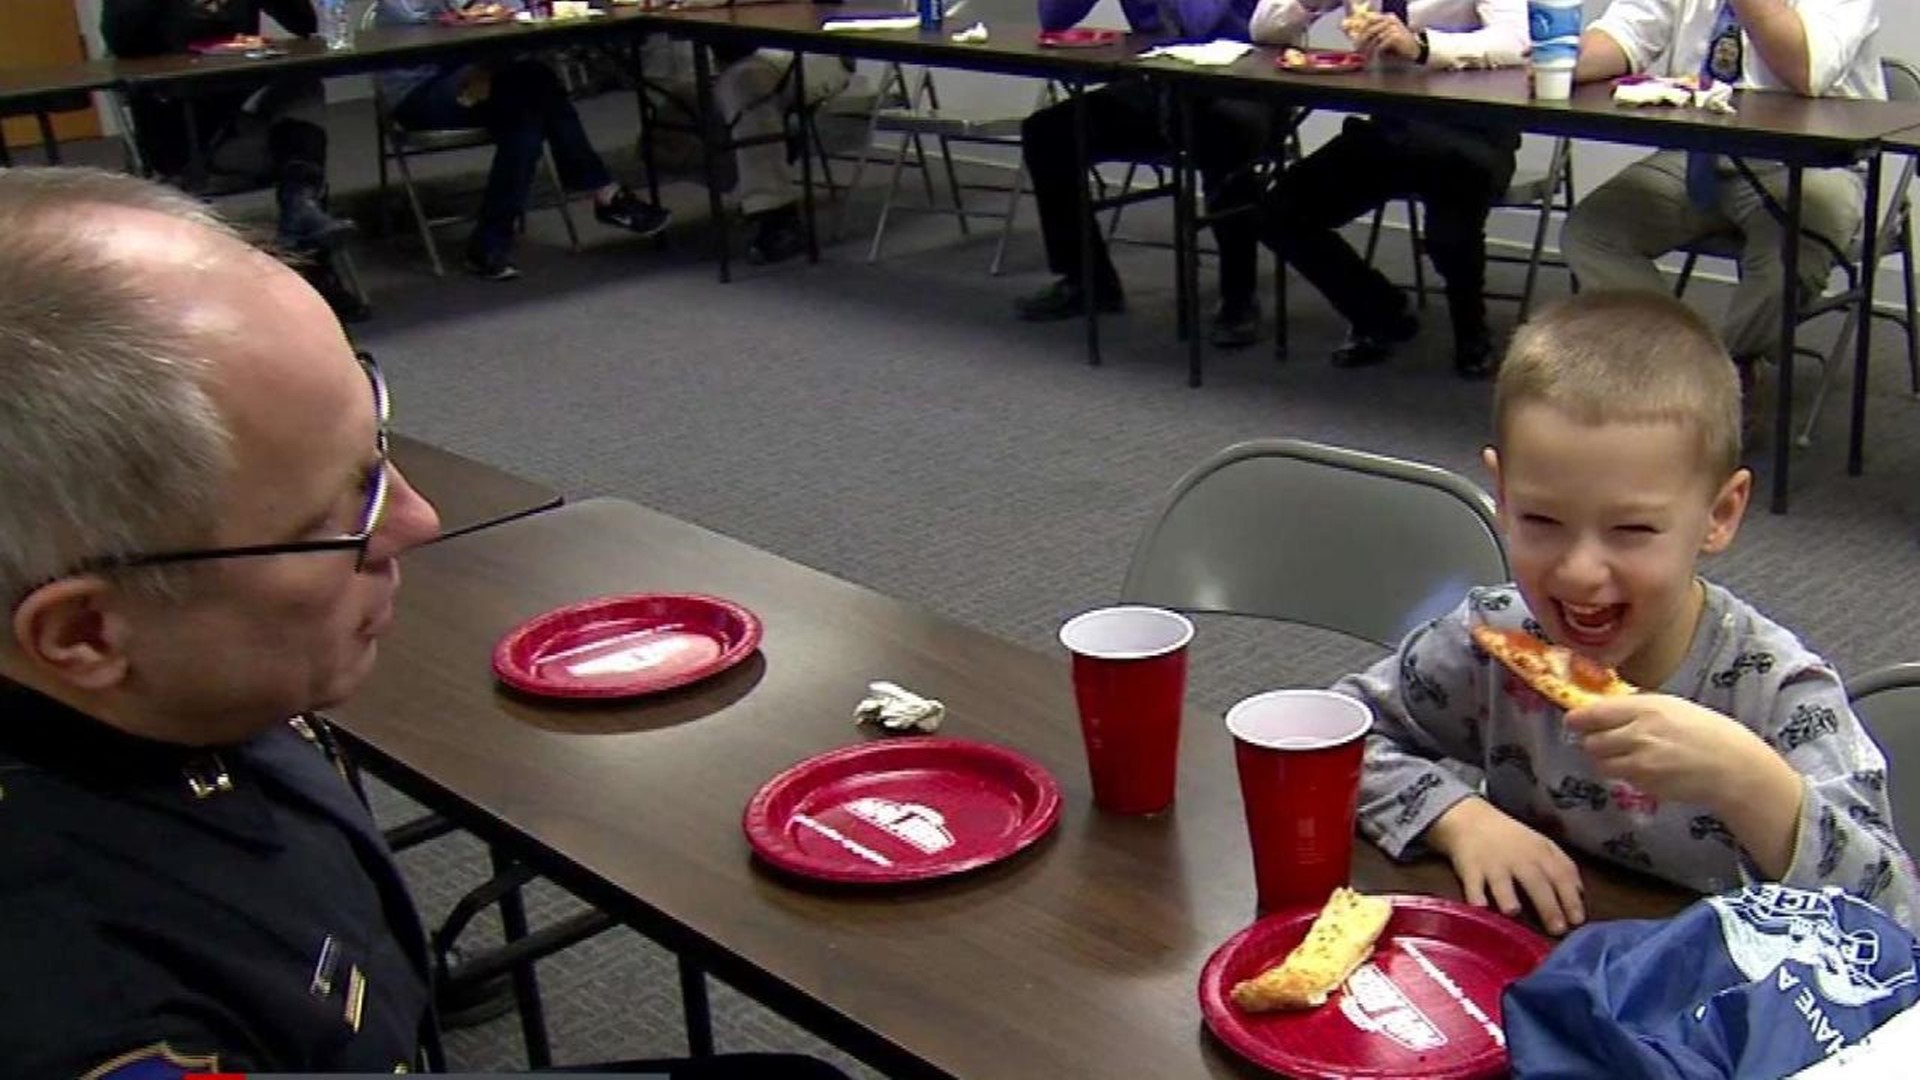 Boy donates pizza party to police